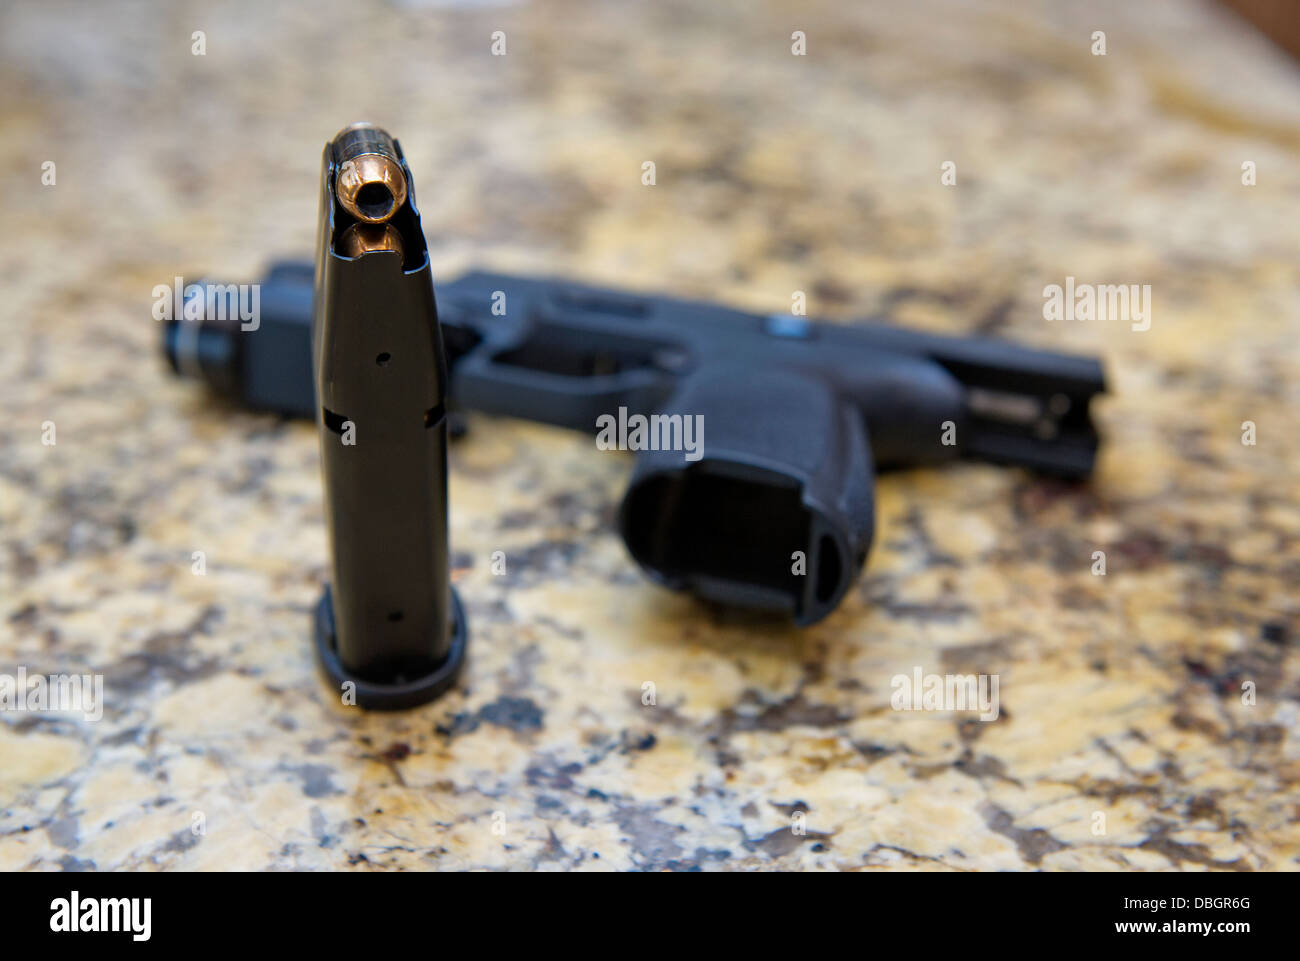 A Sig Sauer P250 gun being kept as a protection against intruders at a private home, Santa Ana, California Stock Photo